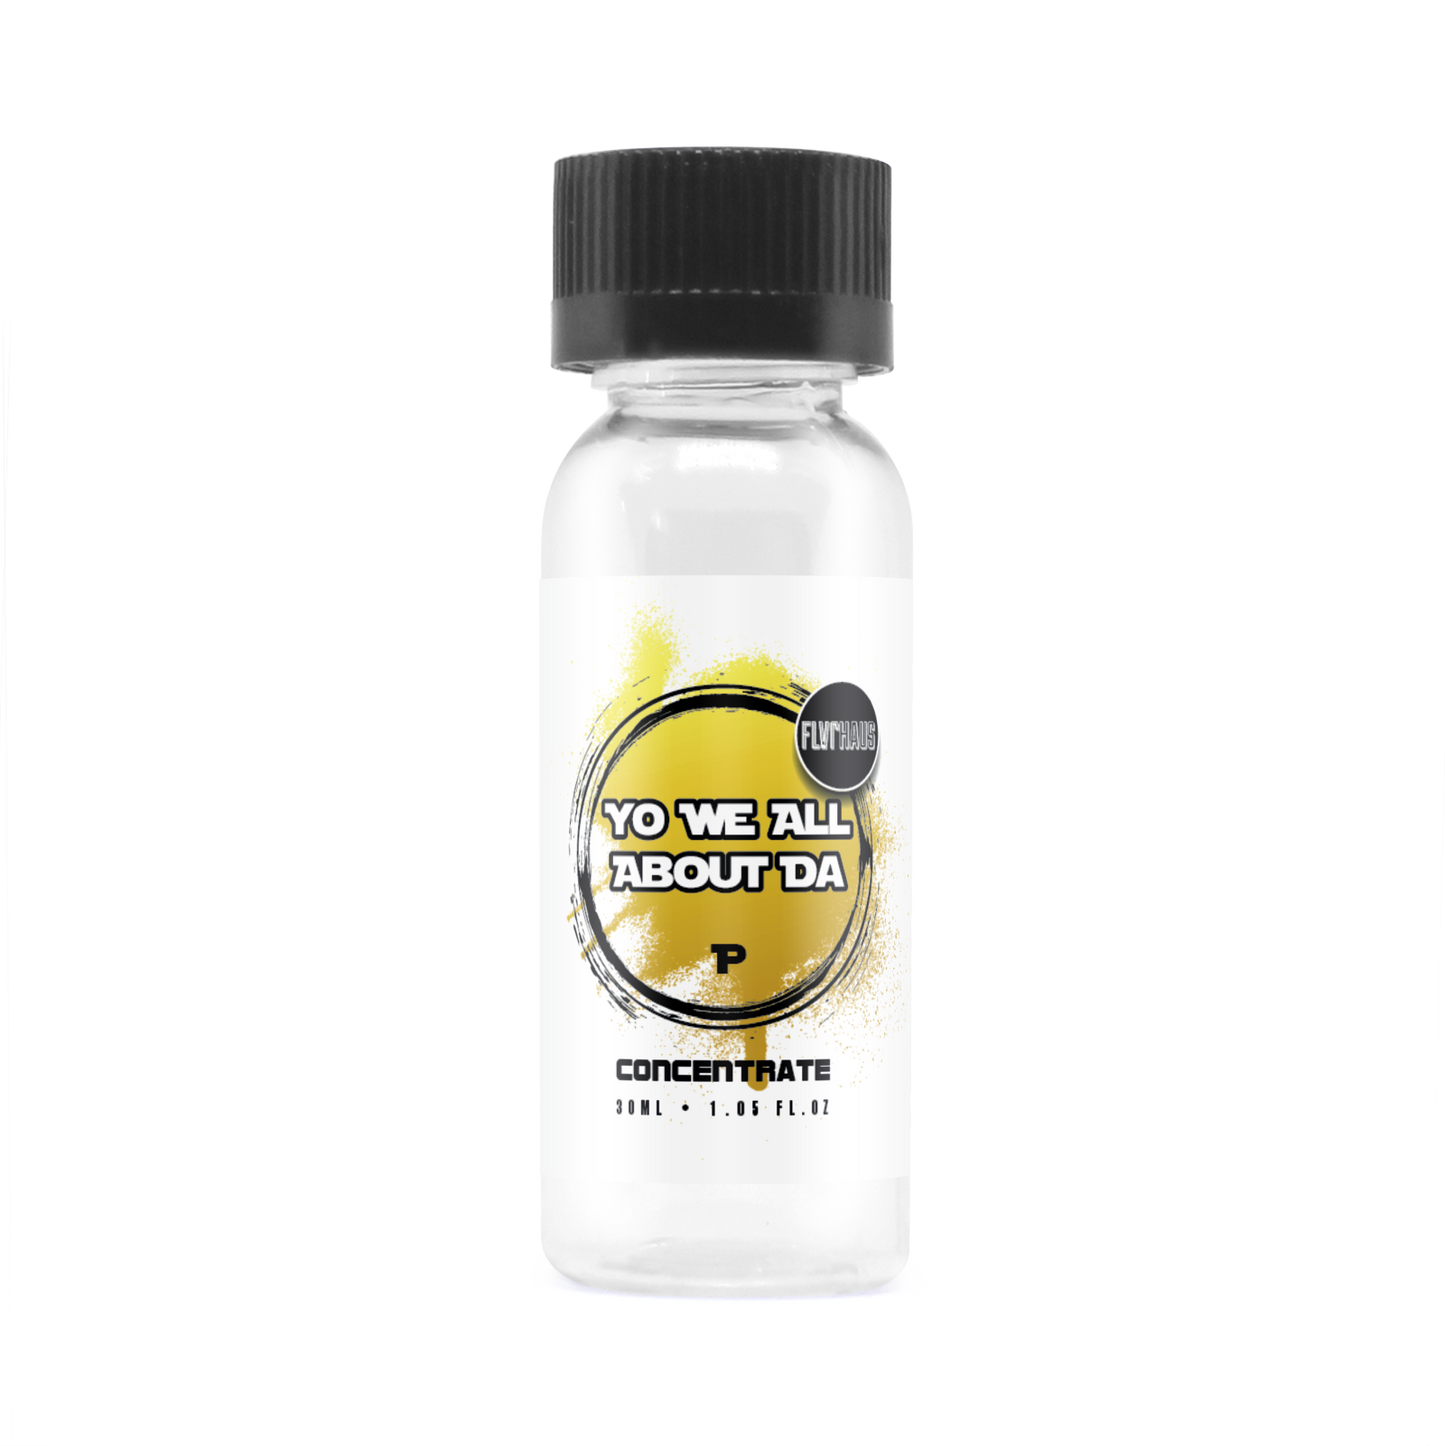 Cloud Chasers - P! 30ml Concentrate by FLVRHAUS - The Ace Of Vapez